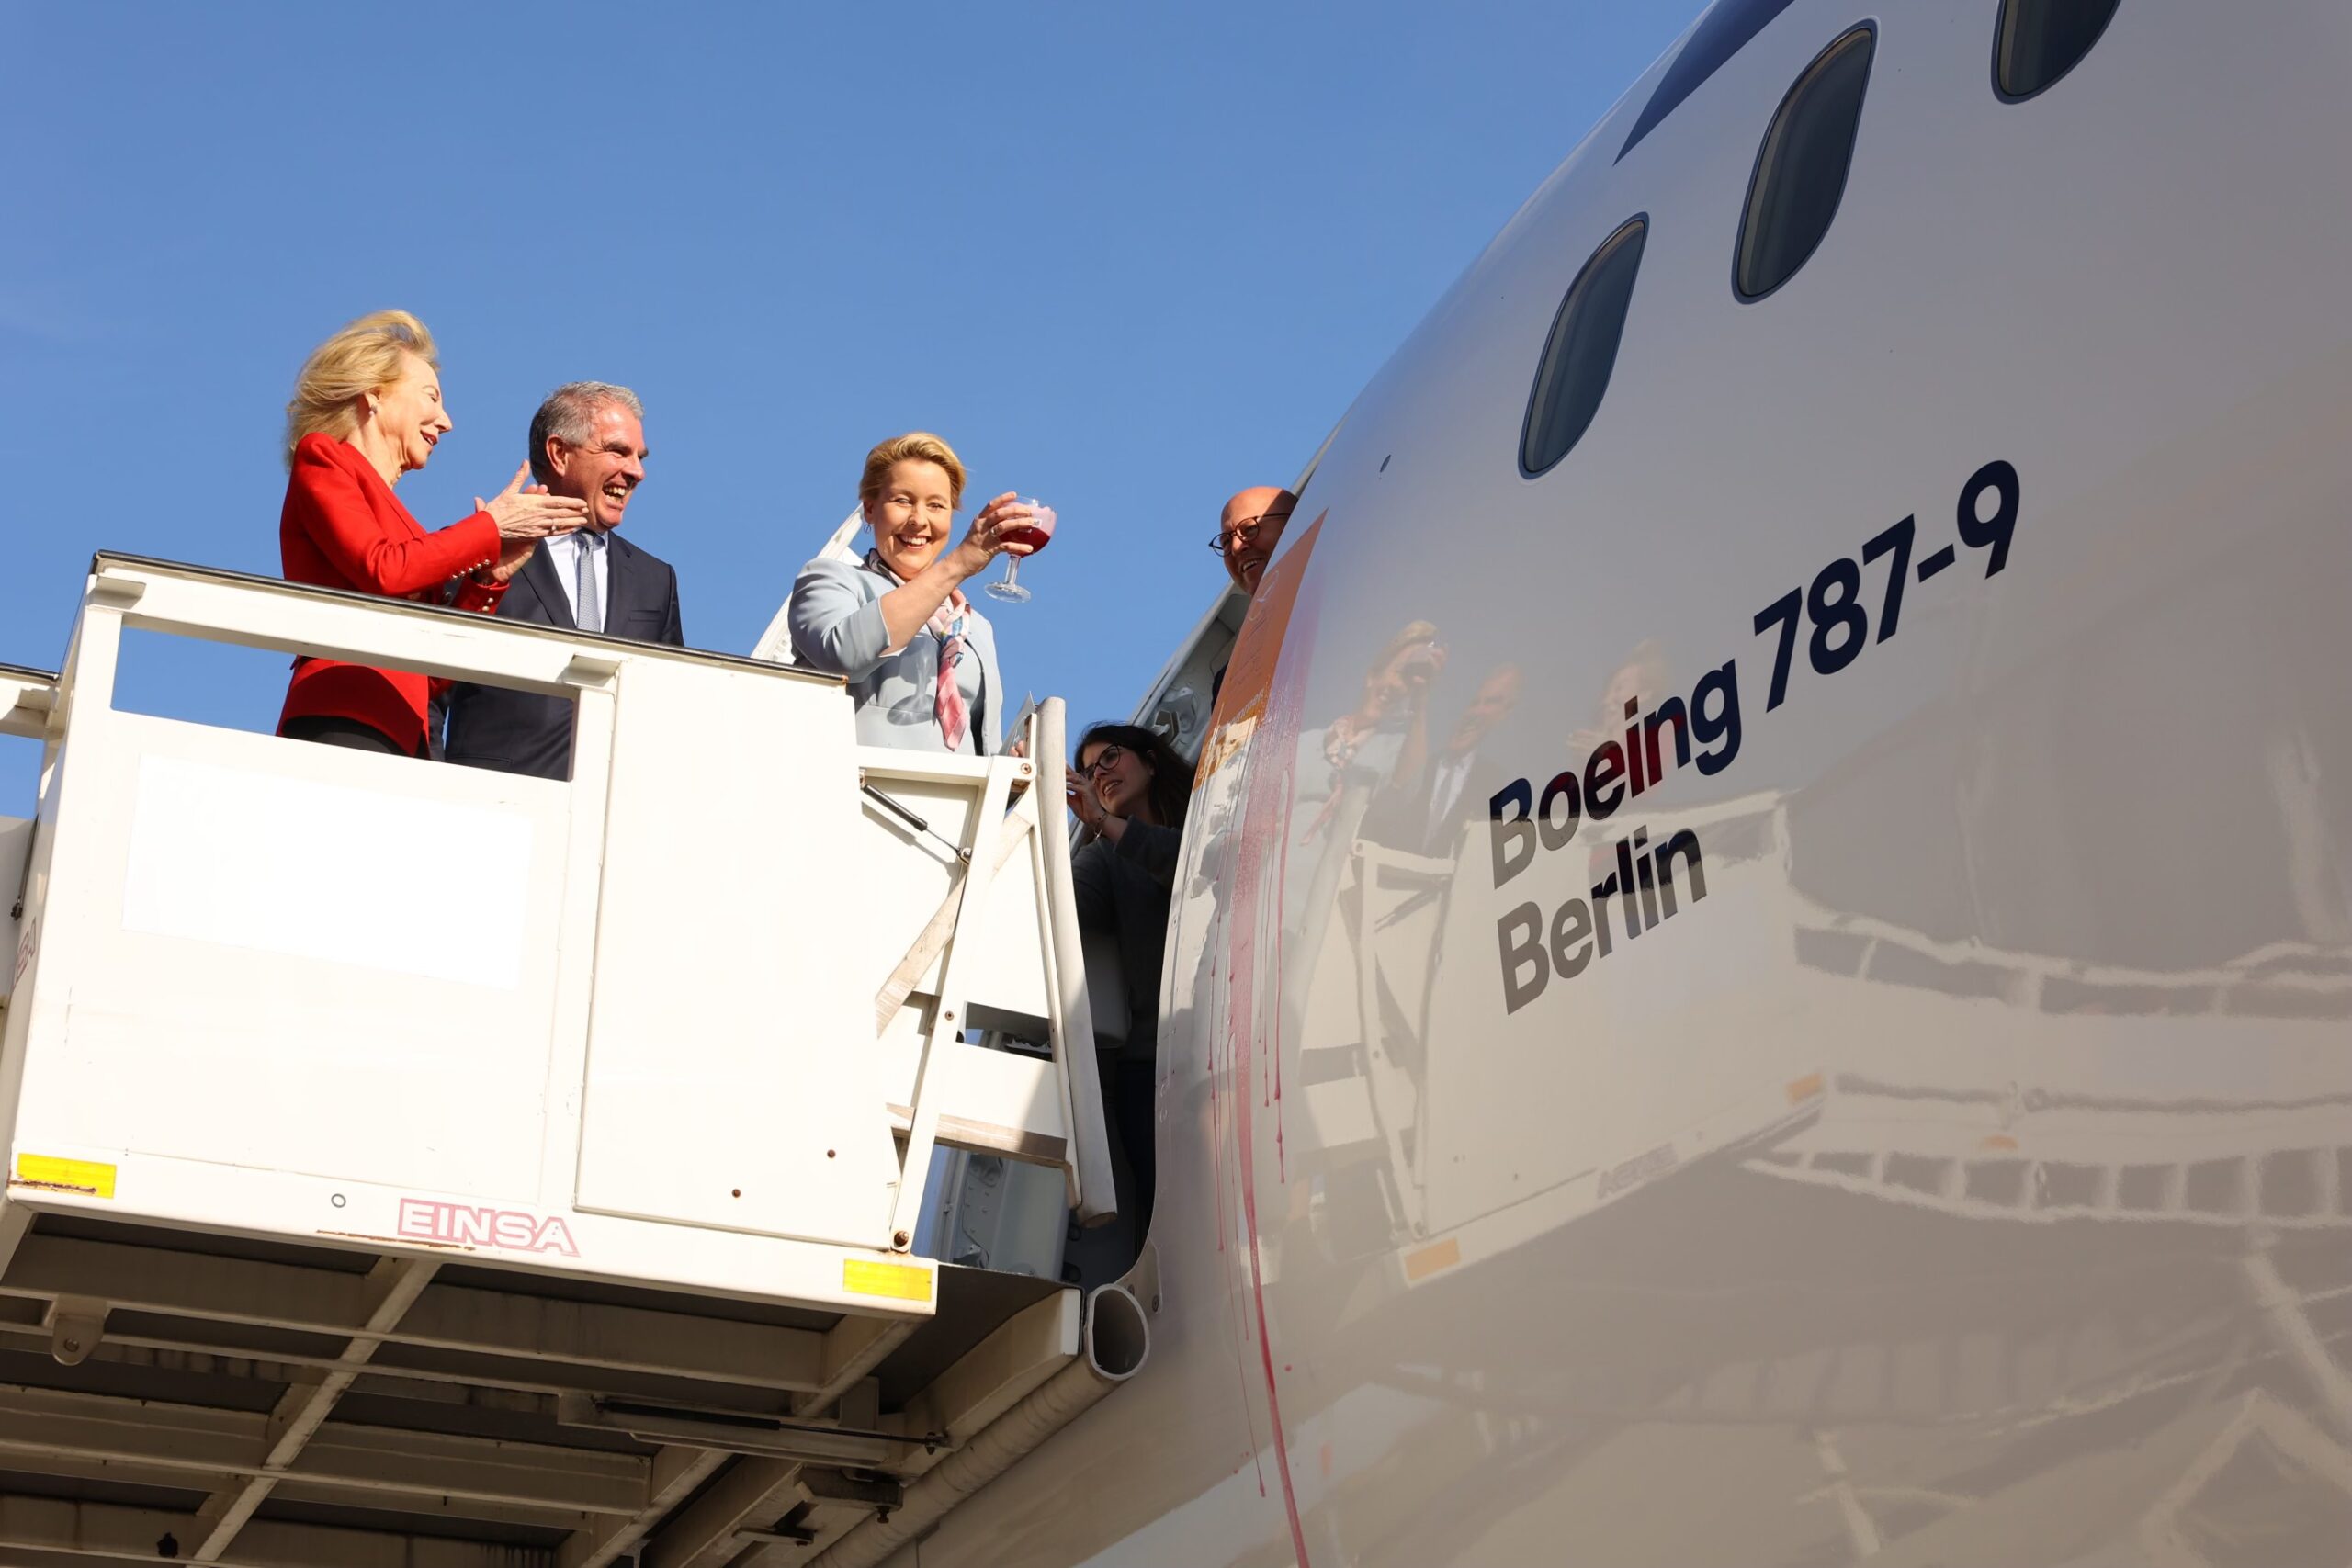 Lufthansa's First Dreamliner to be named 'Berlin'